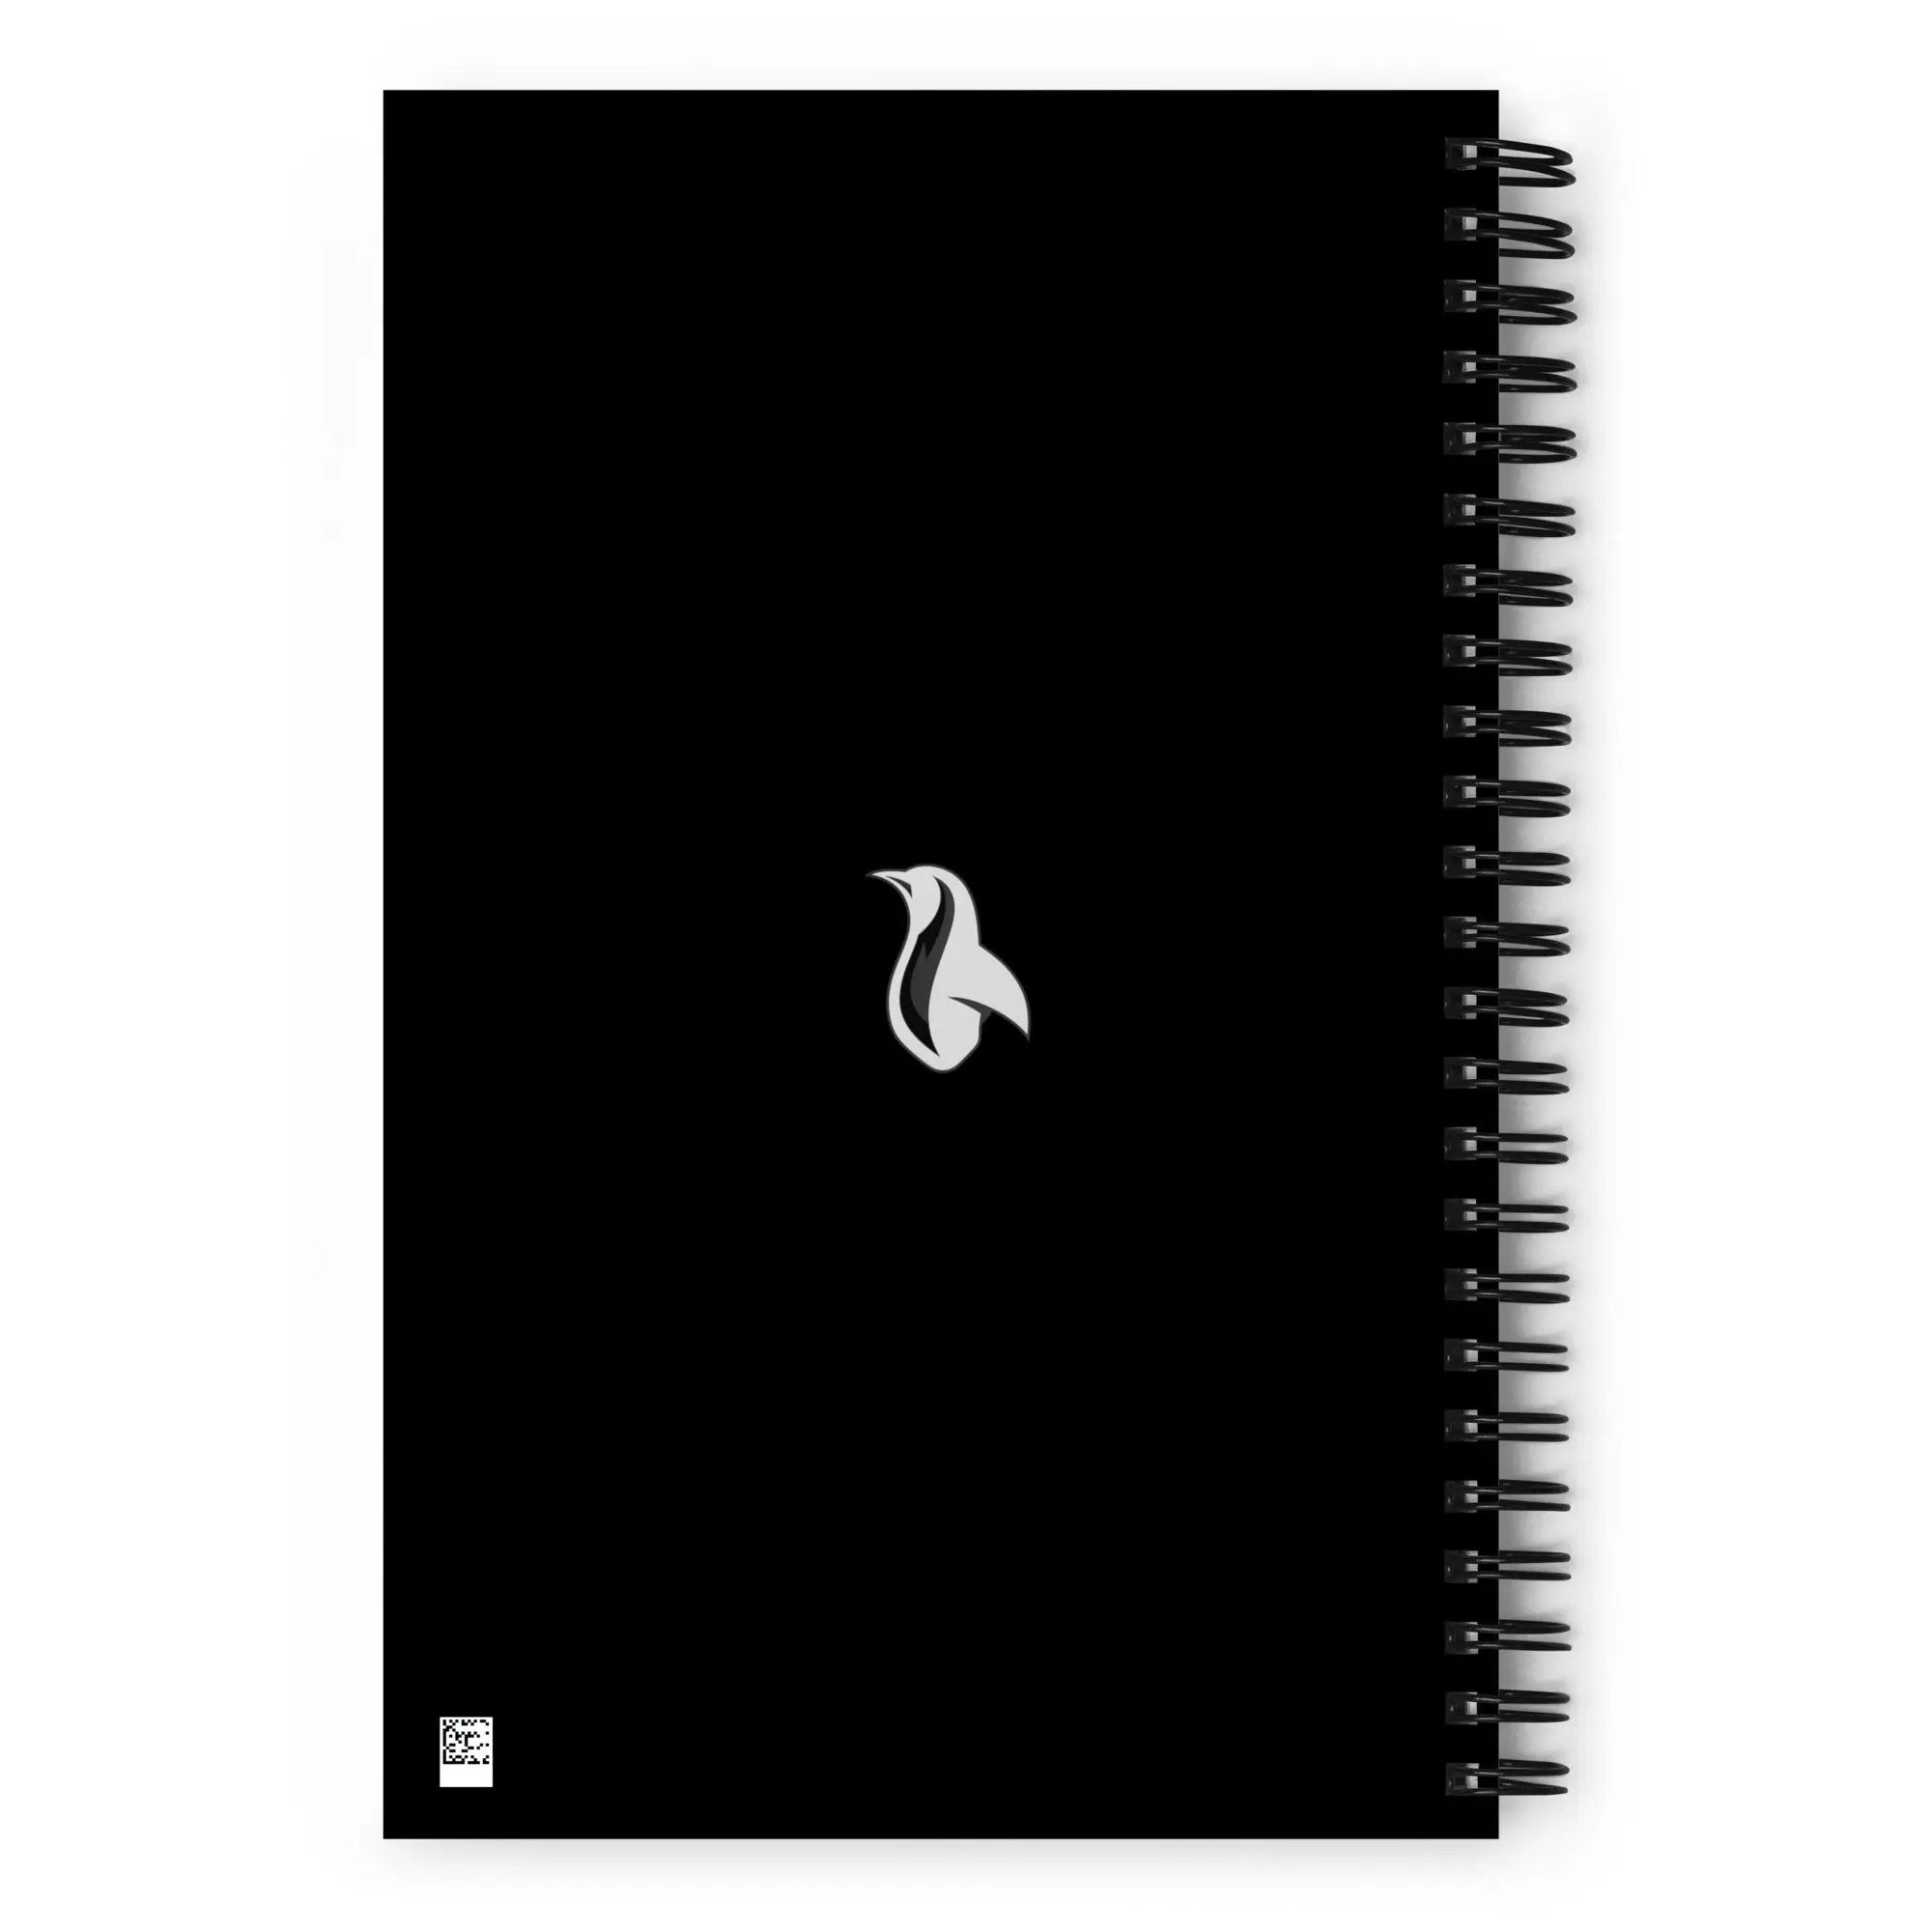 The Monster Squad "The Mummy" Spiral notebook